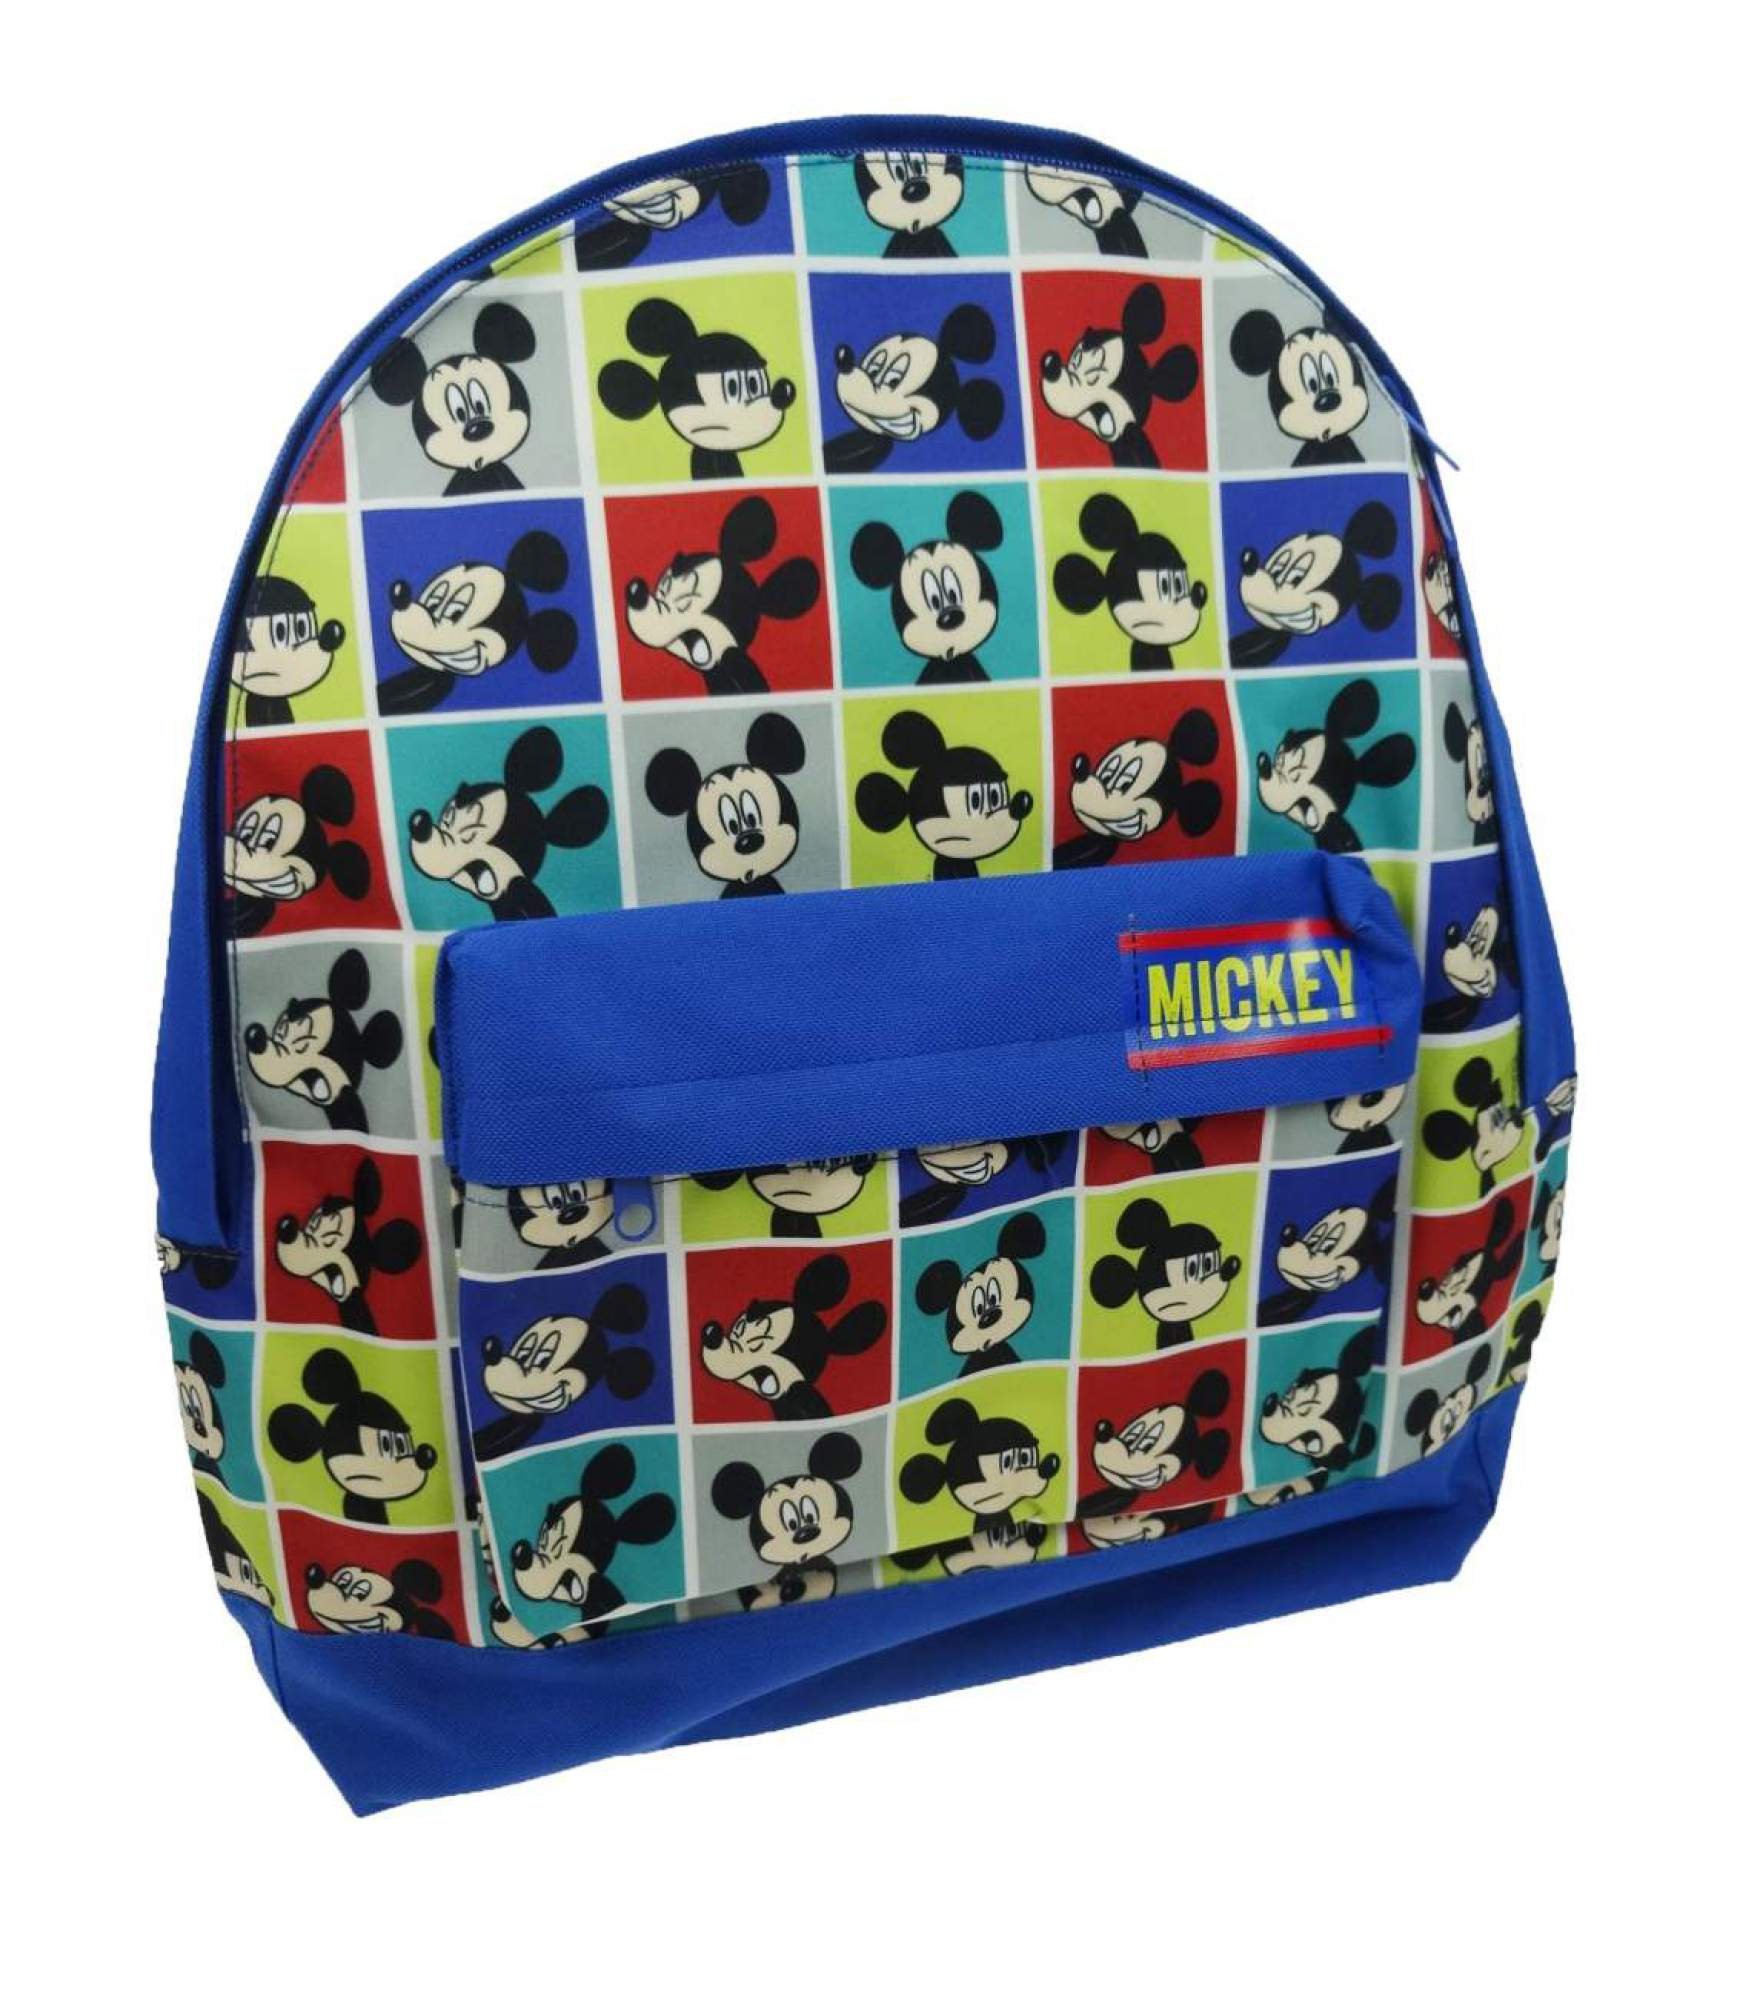 Disney Mickey Mouse 'Say Cheese' Roxy Large Sports School Bag Rucksack Backpack